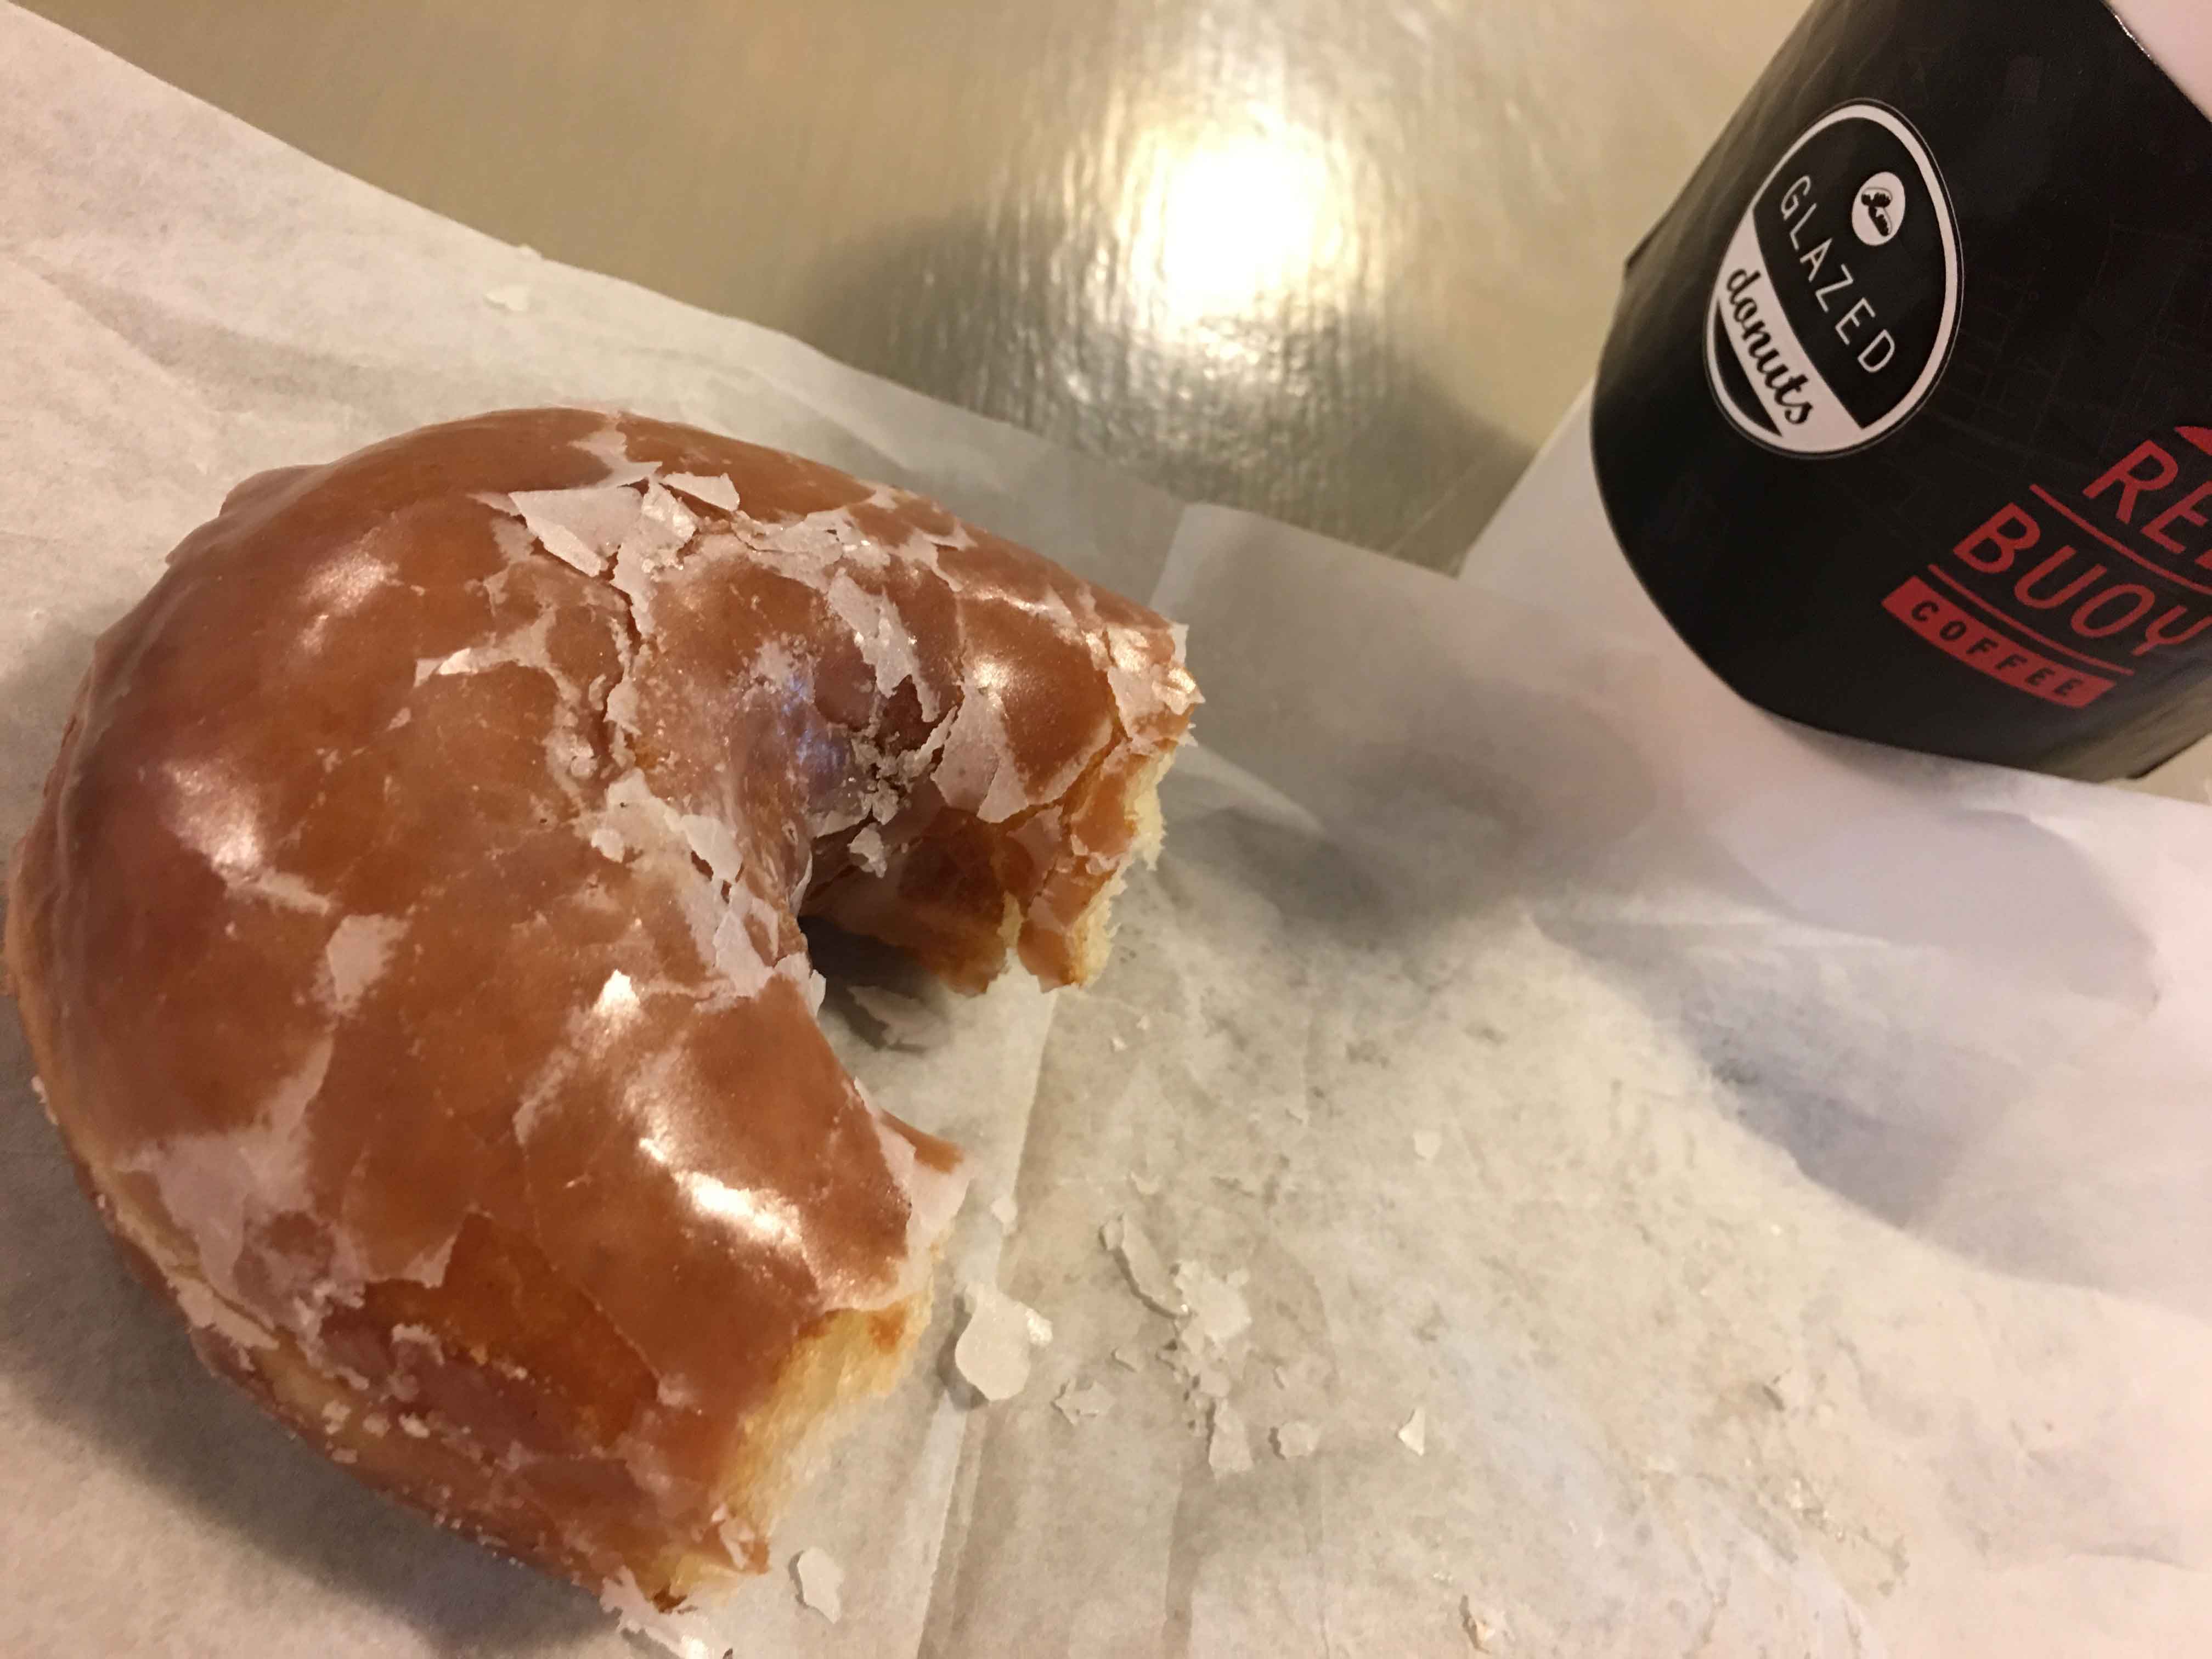 Glazed Donuts & Red Buoy Coffee a Perfect Start to the Day